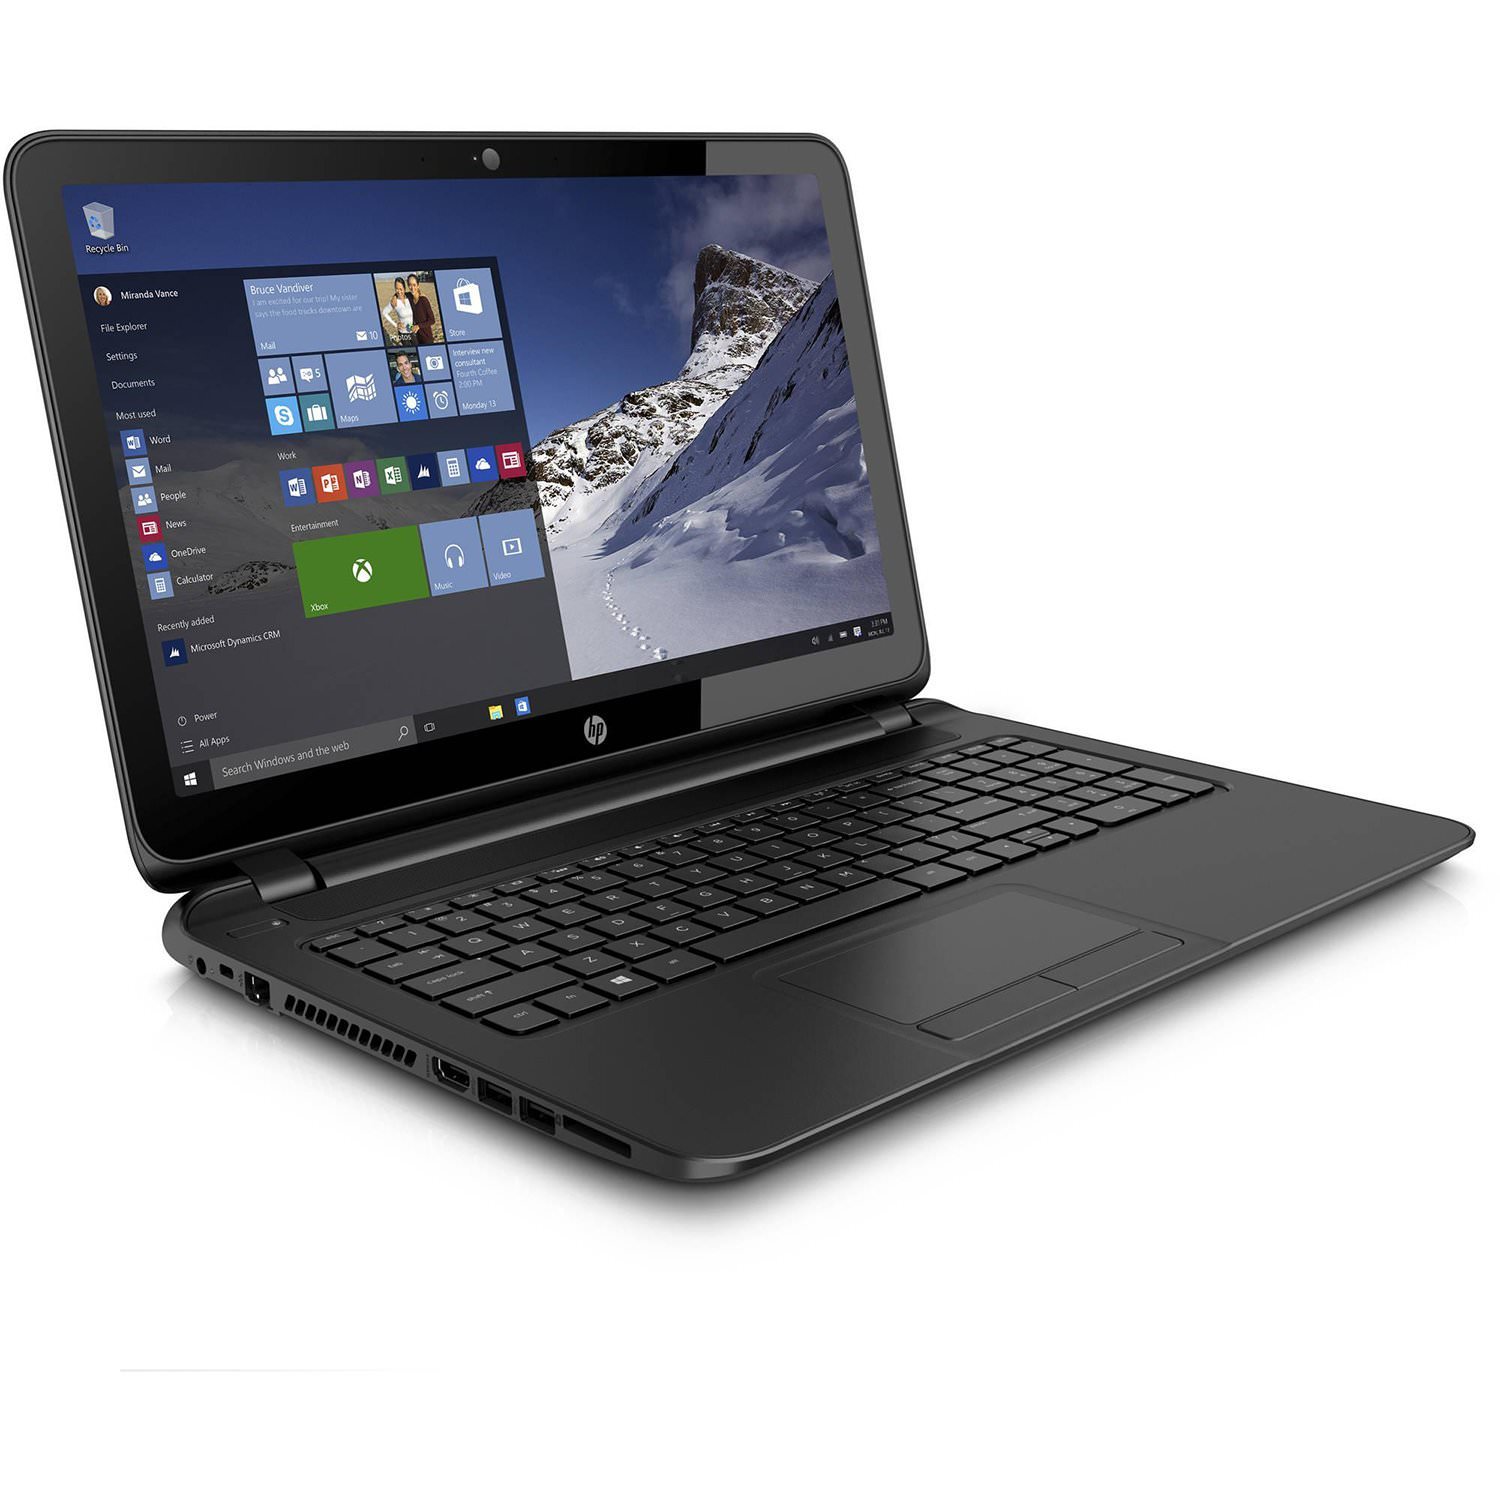 HP Black Licorice 15.6" 15-F387WM Laptop PC with AMD A8-7410 Processor, 4GB Memory, touch screen, 500GB Hard Drive and Windows 10 Home - image 1 of 41